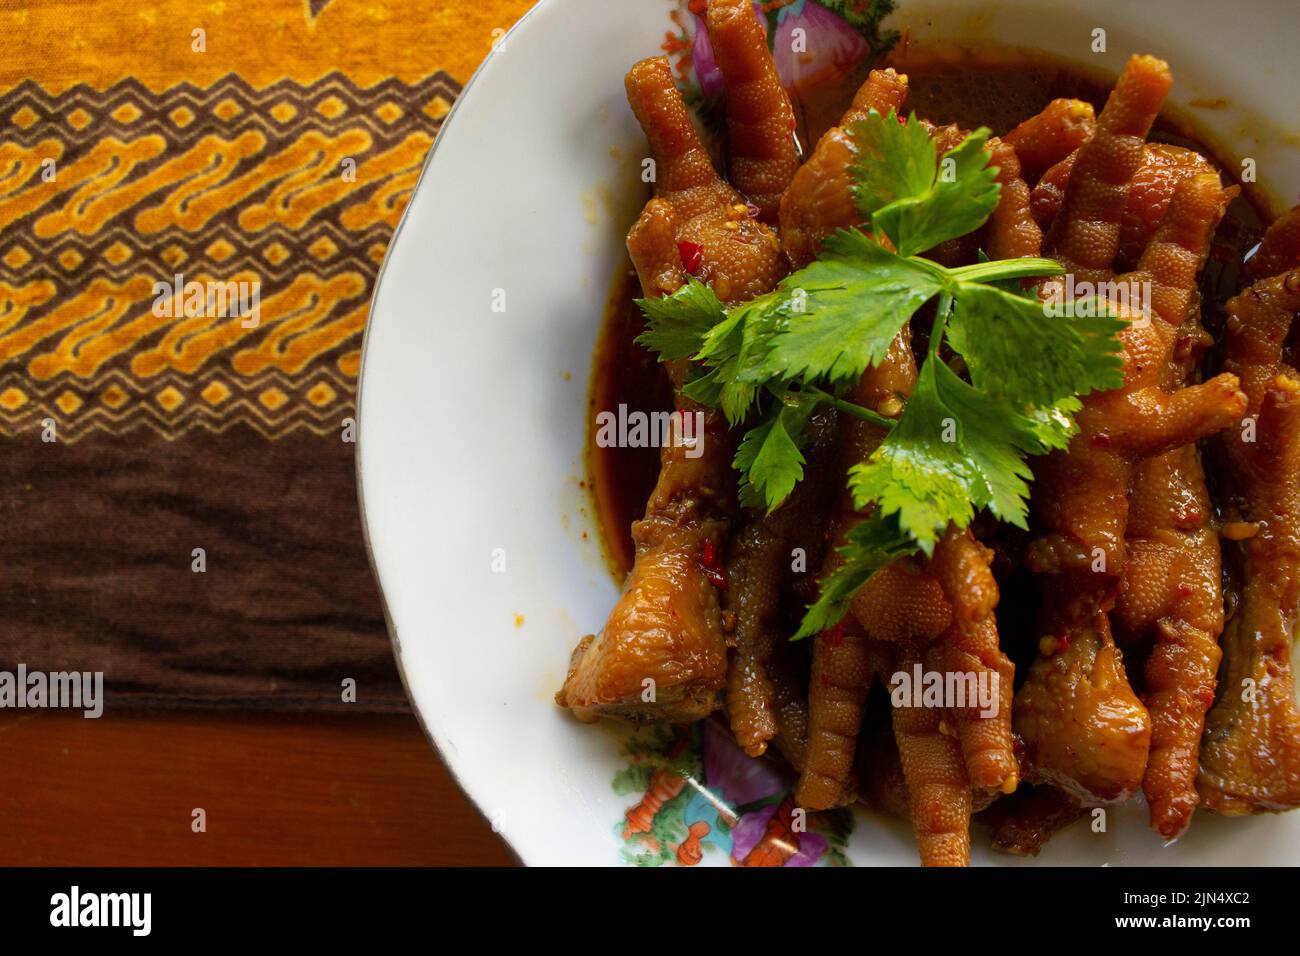 Spicy chicken feet with celery, chili, onion, garlic served with a white plate on table Stock Photo